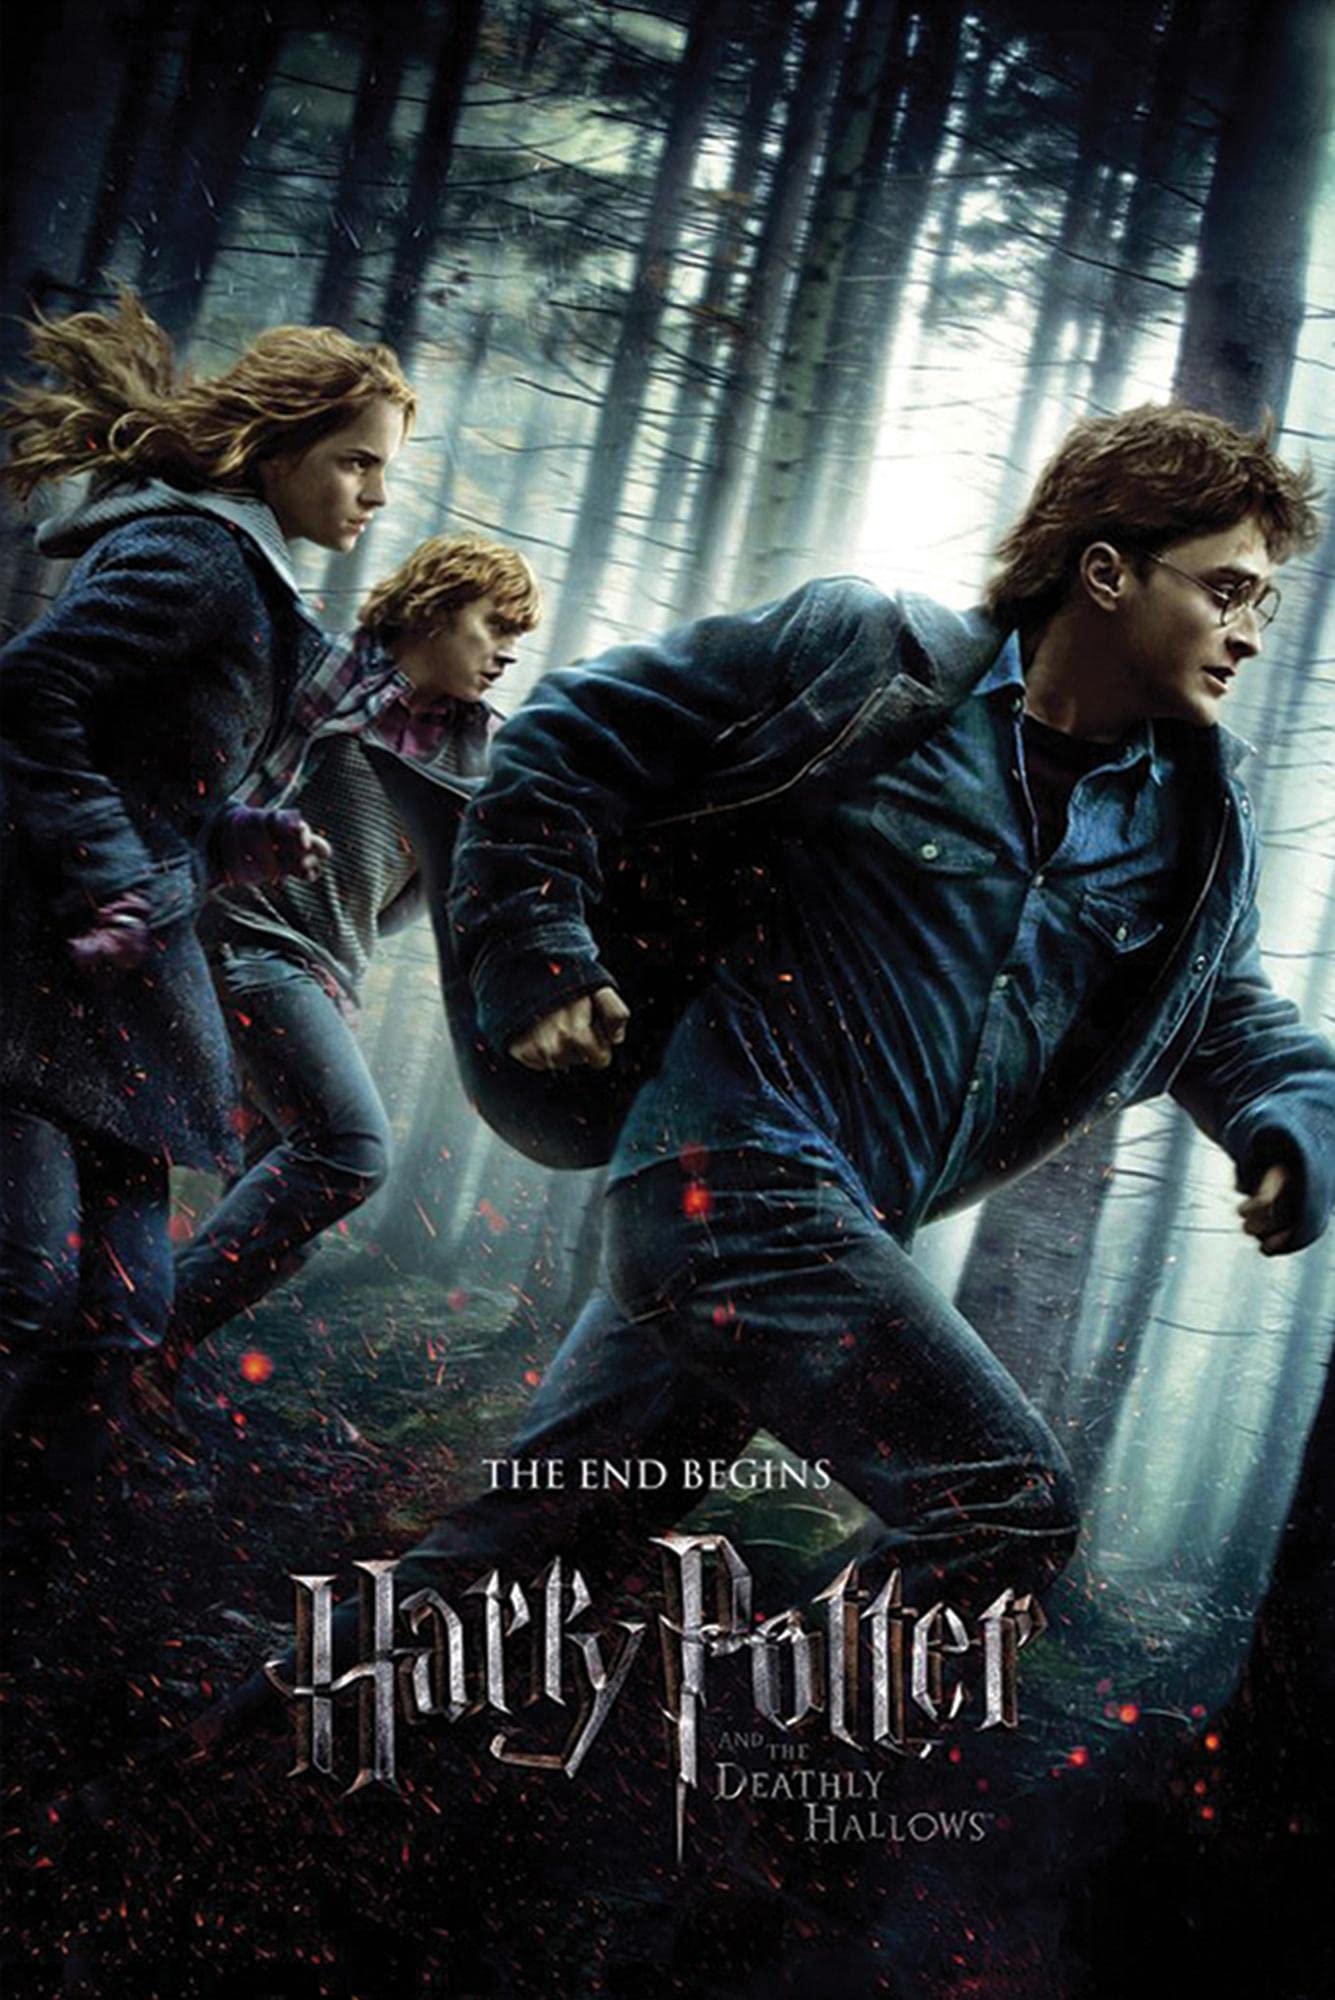 Harry Potter Movie Club Haverstraw King's Daughters Public Library